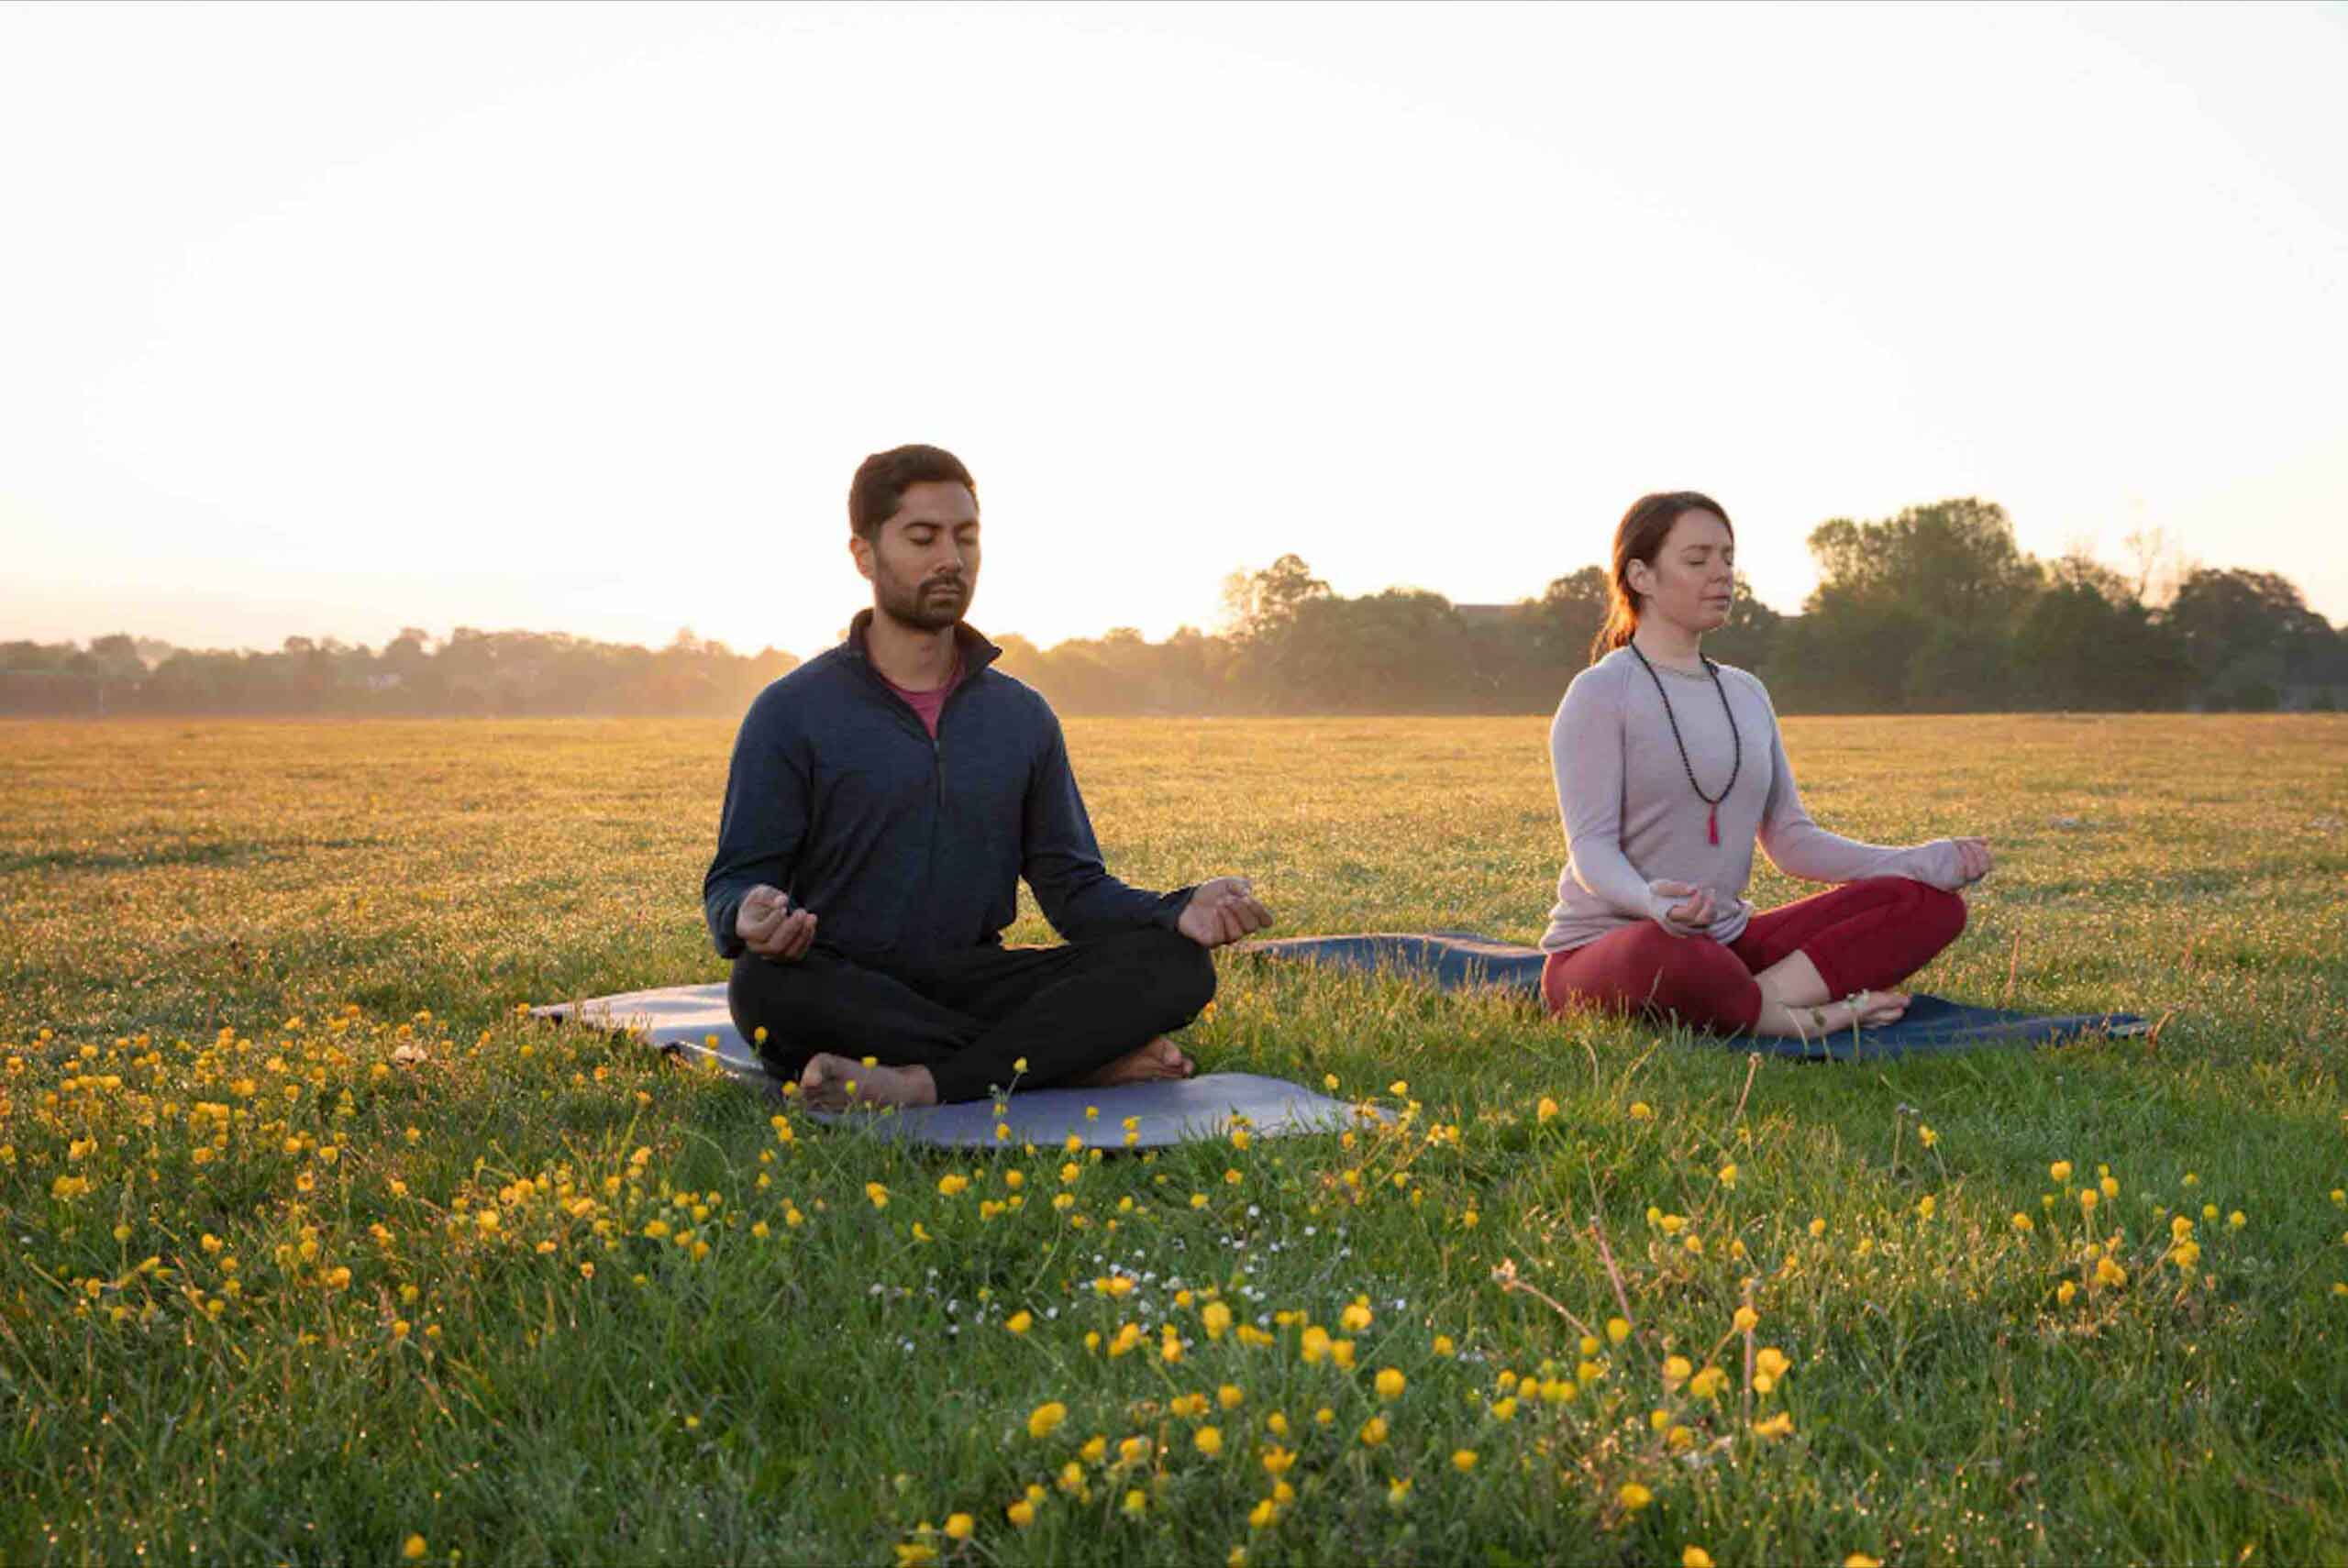 Man and woman doing yoga or breathing exercises together in a serene, calm natural environment